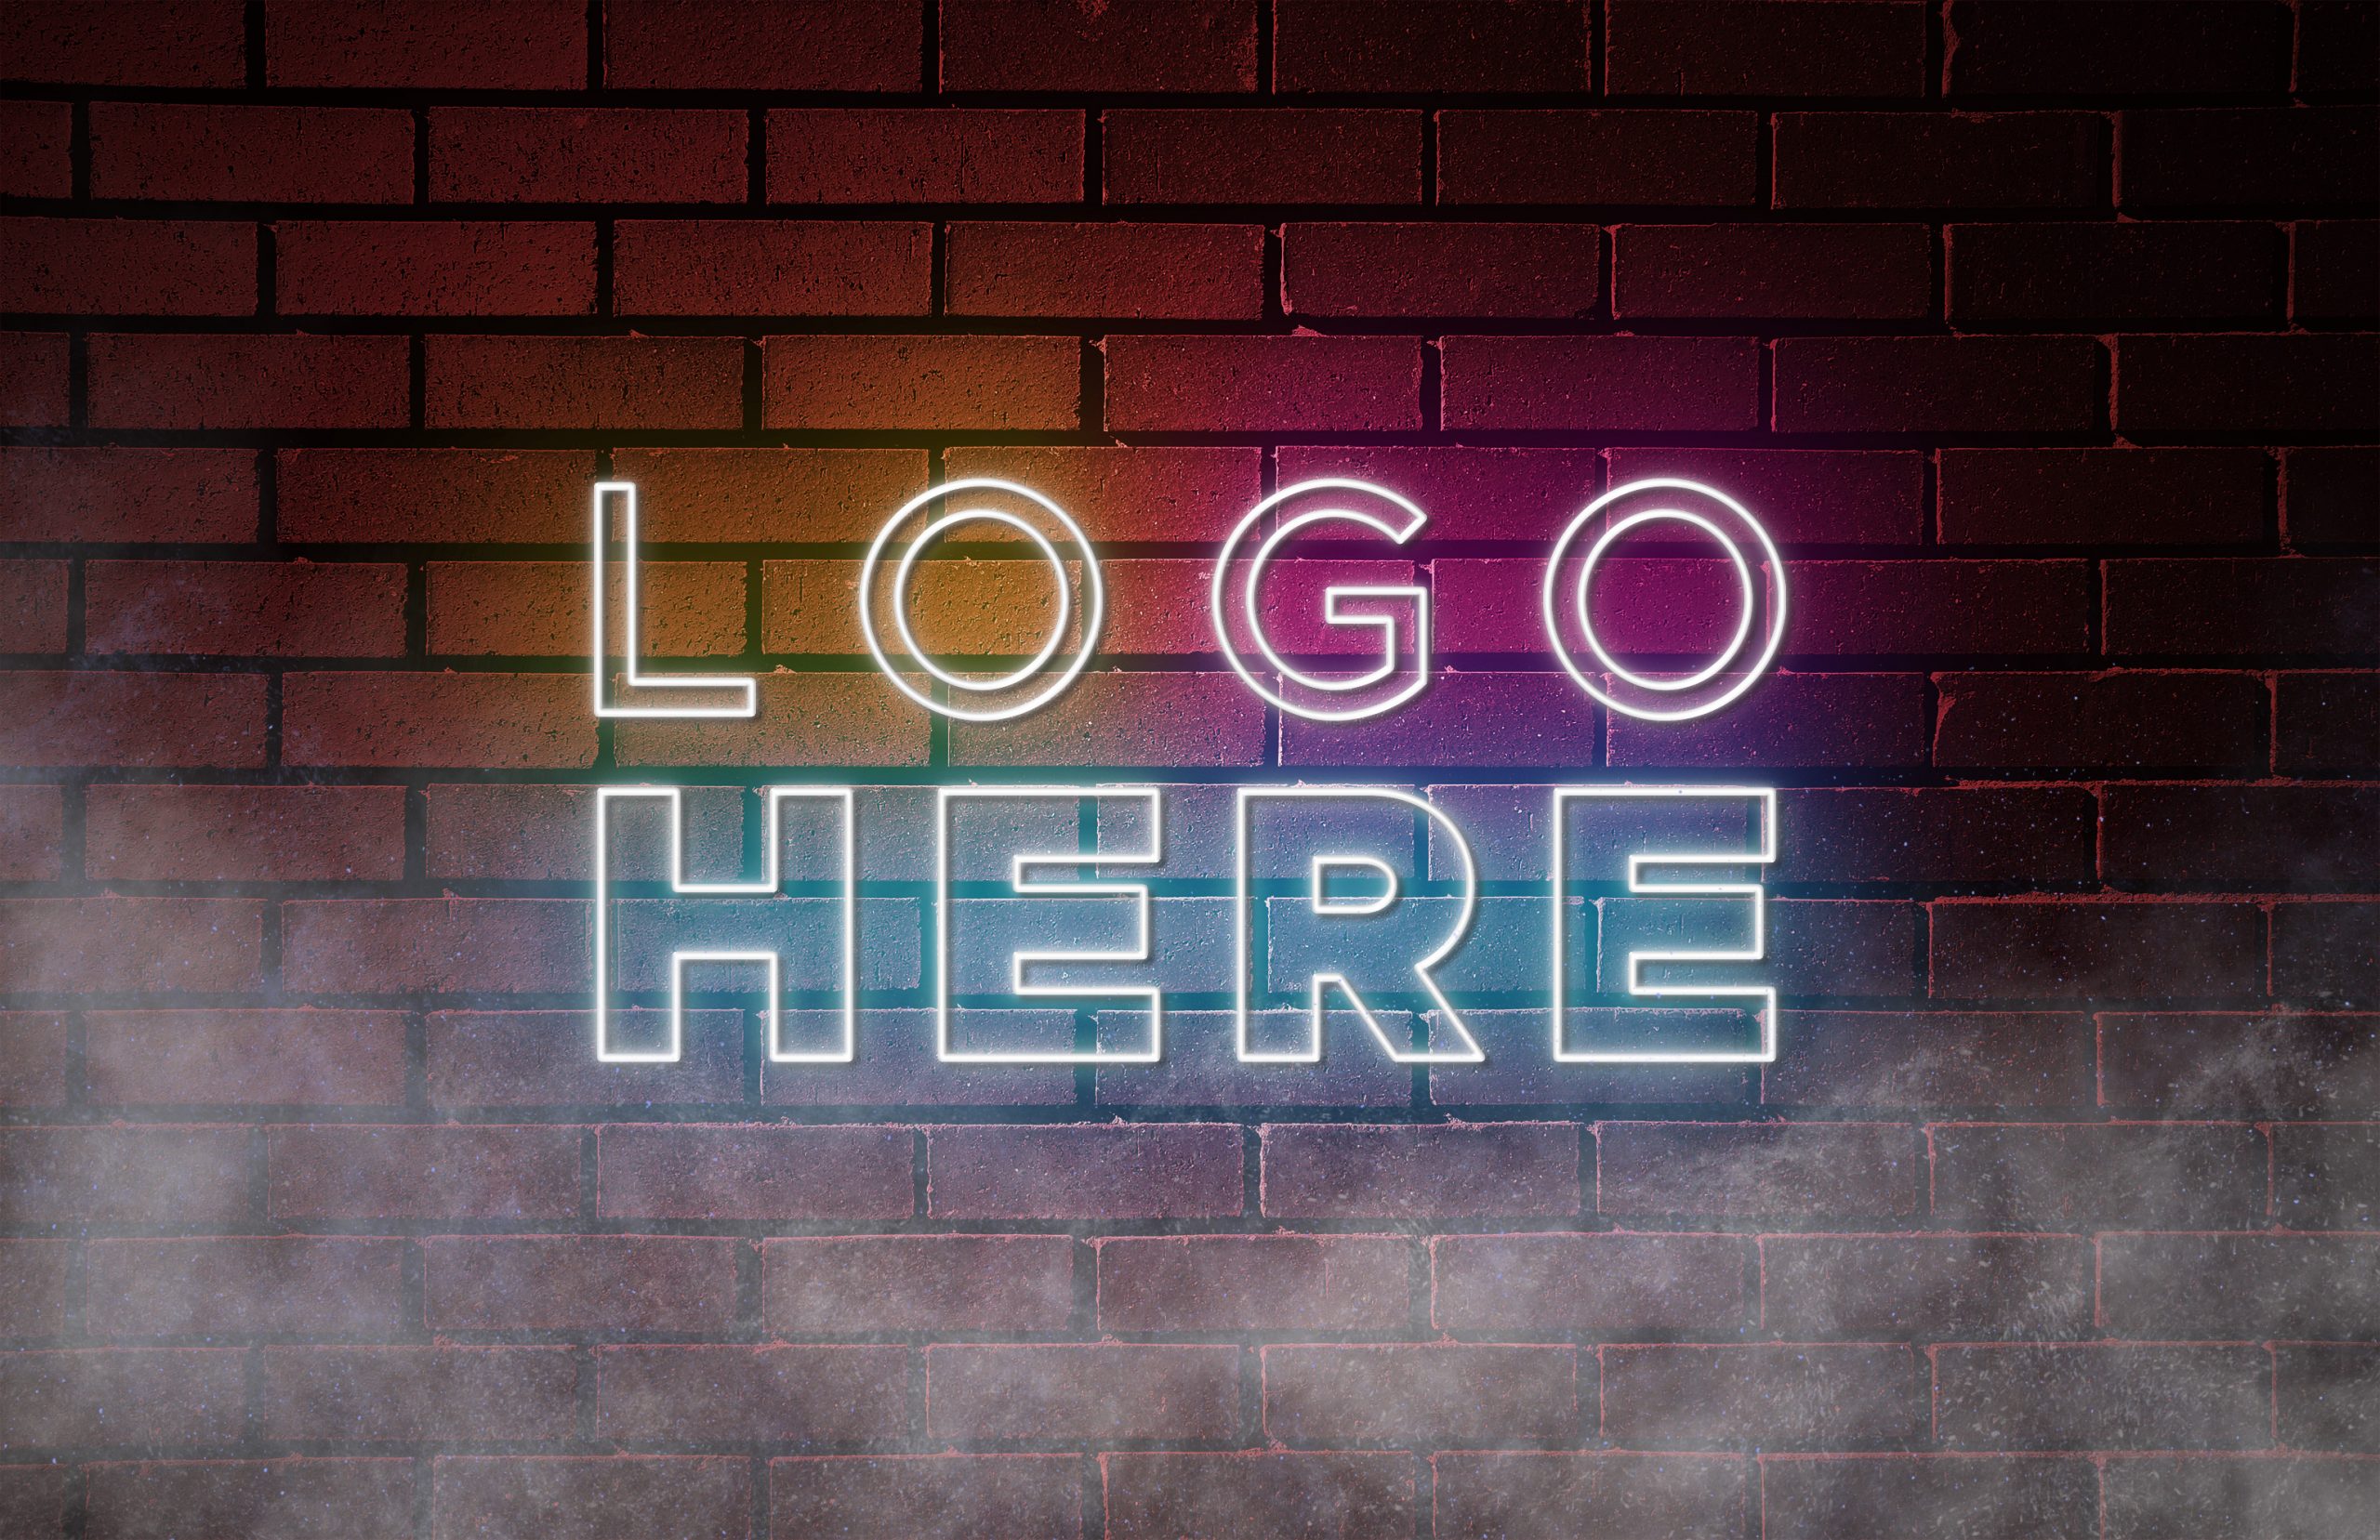 Download Musica Neon Mockups Free - Free Neon Logo Mockup - You can use these files for promoting your ...